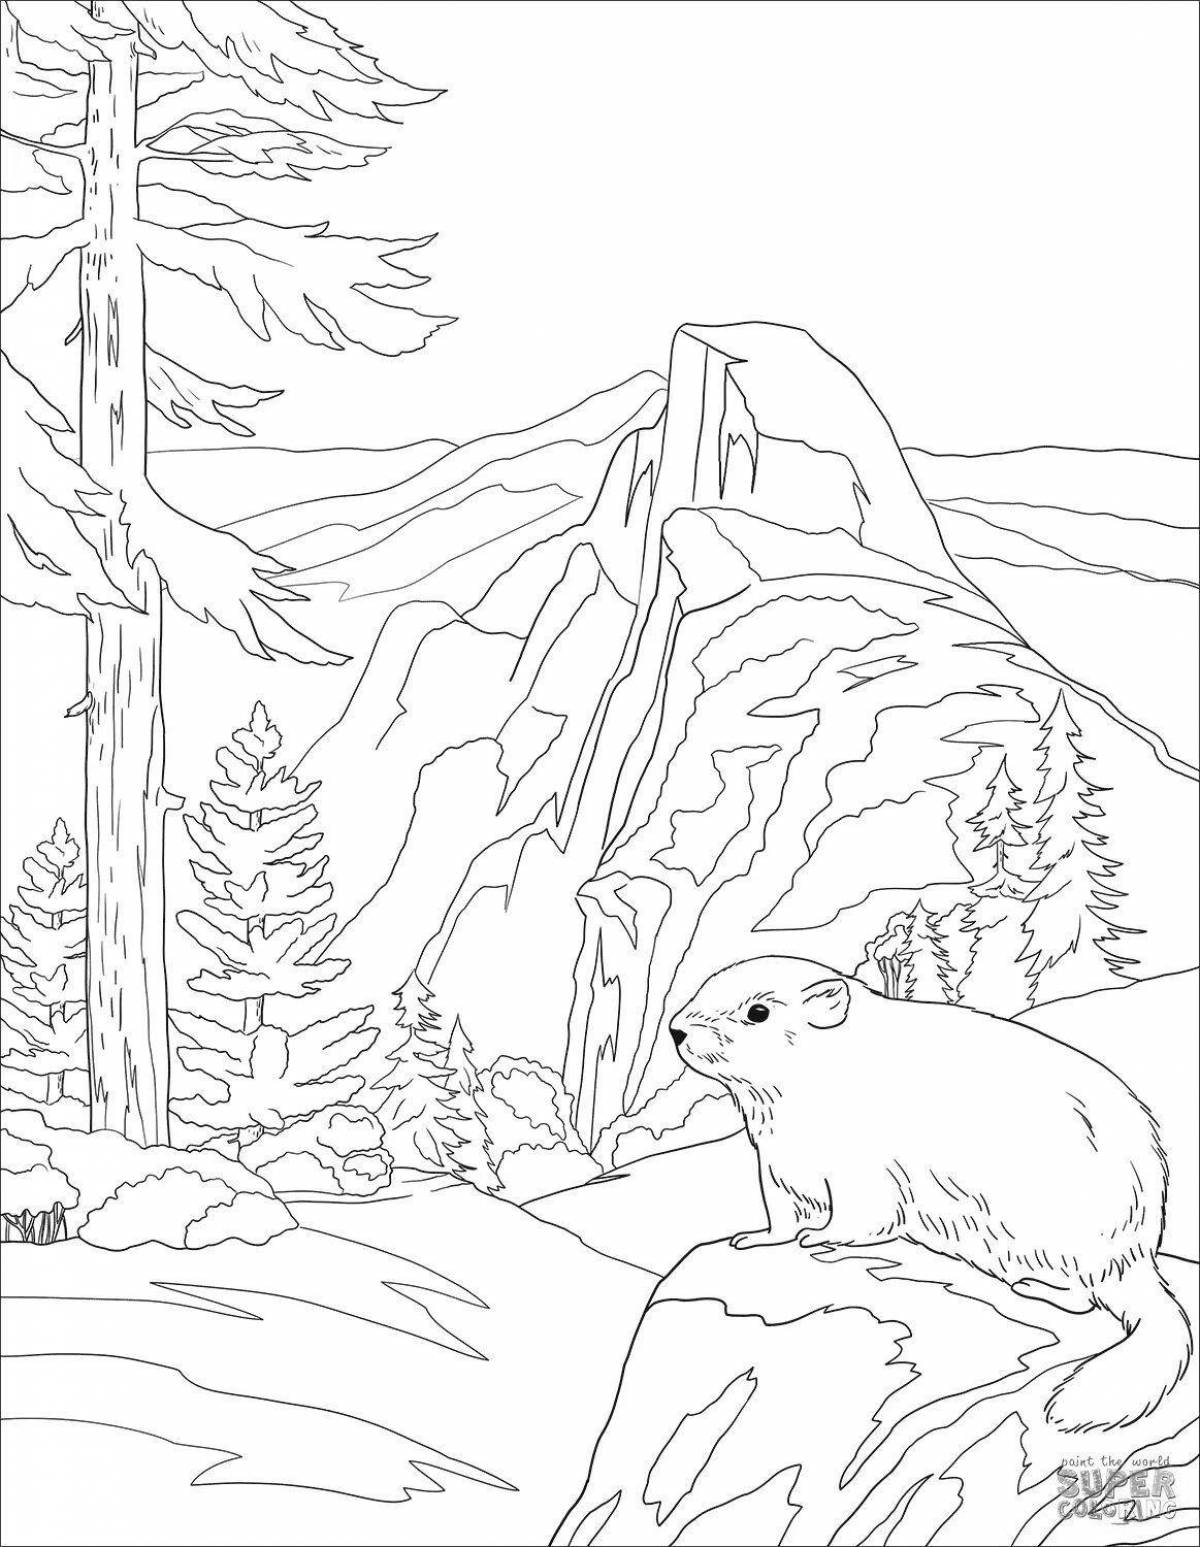 Delightful coloring pages of taiga animals